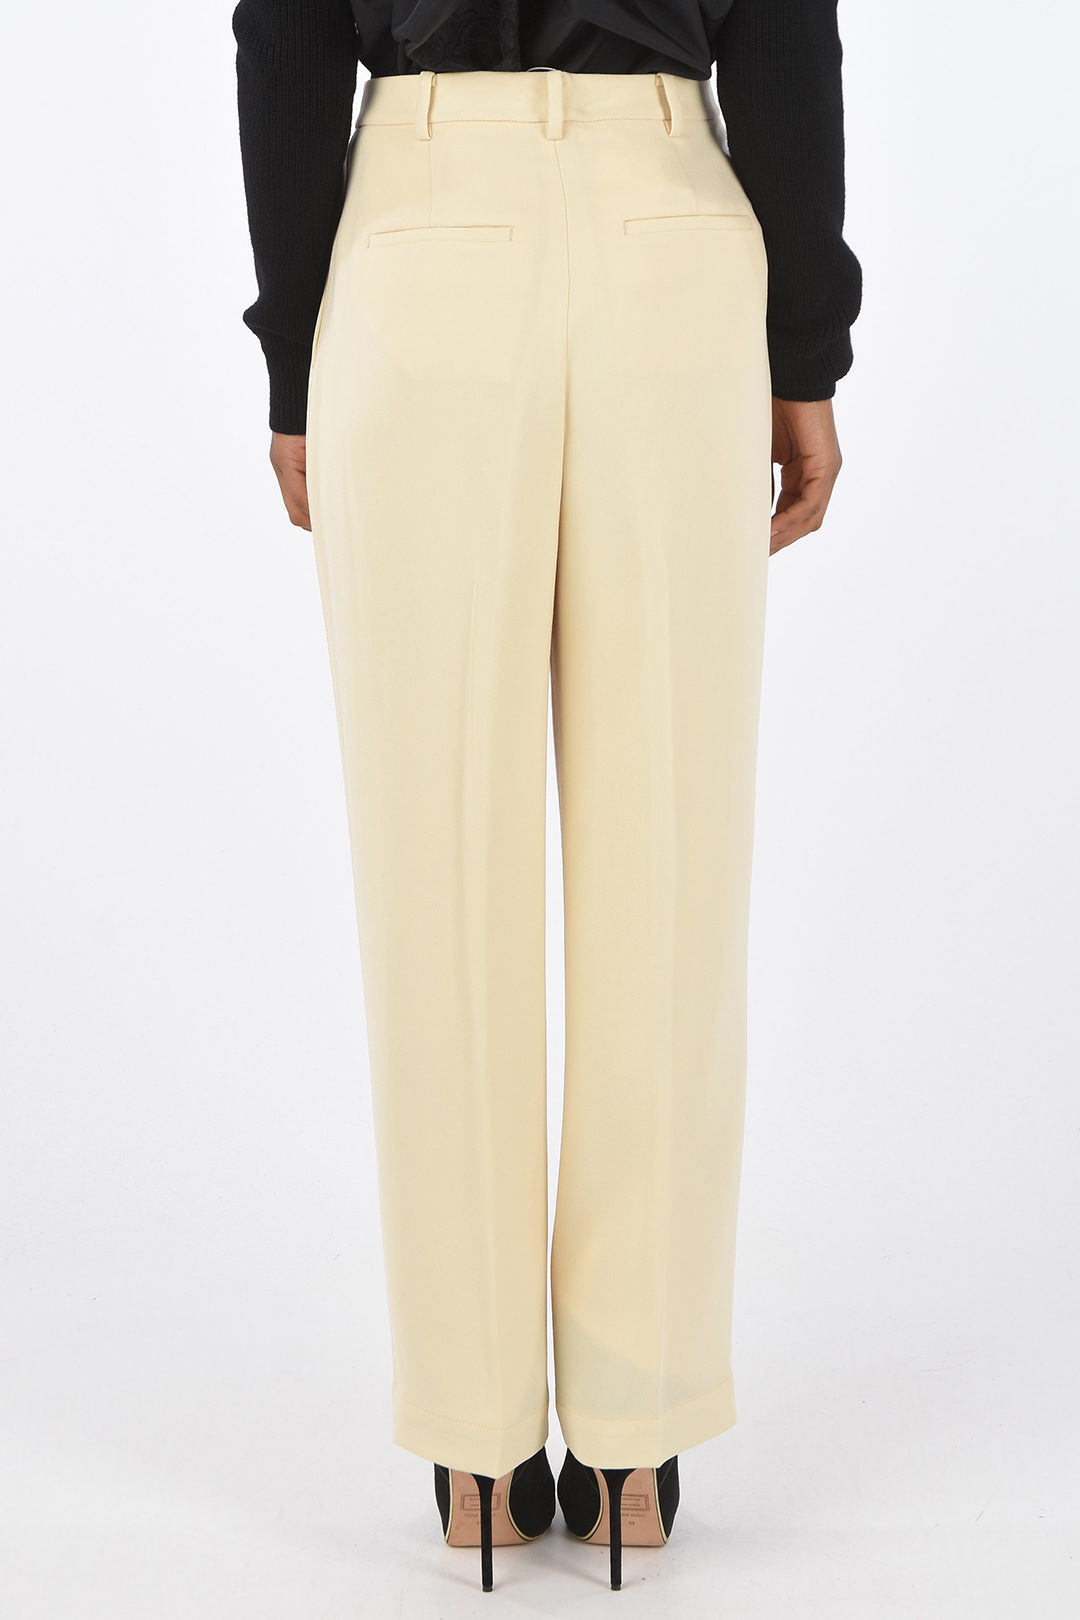 Tory Burch High-waisted Flared Pants in Crepe Effect with Double-pleat  women - Glamood Outlet